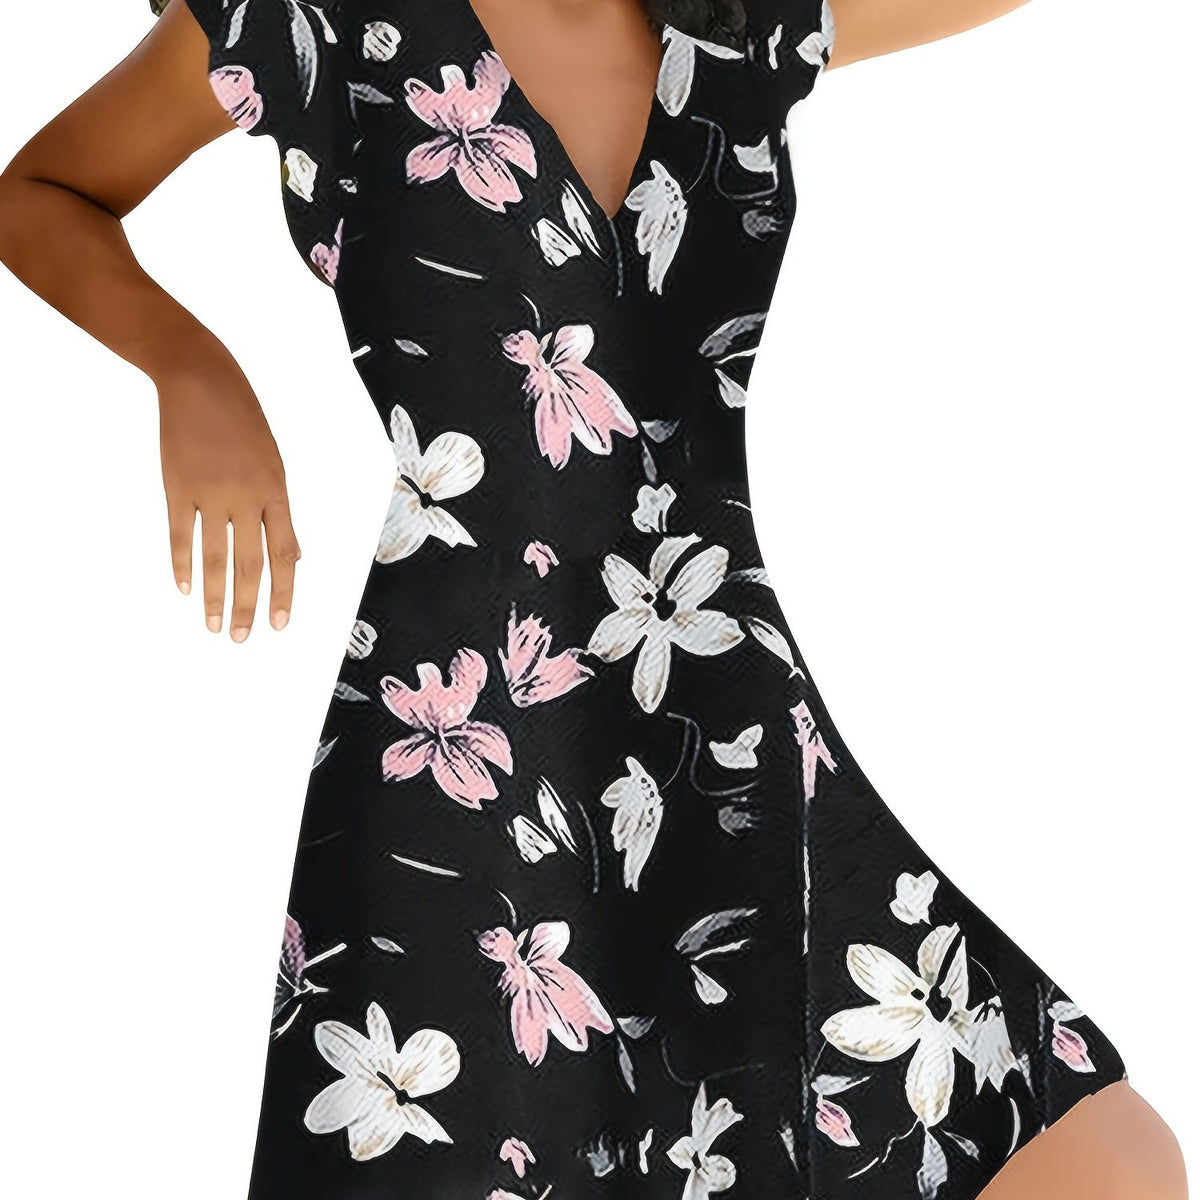 「lovevop」Floral Print V Neck Slim Dress, Short Sleeve Casual Every Day Dress For Fall & Spring, Women's Clothing